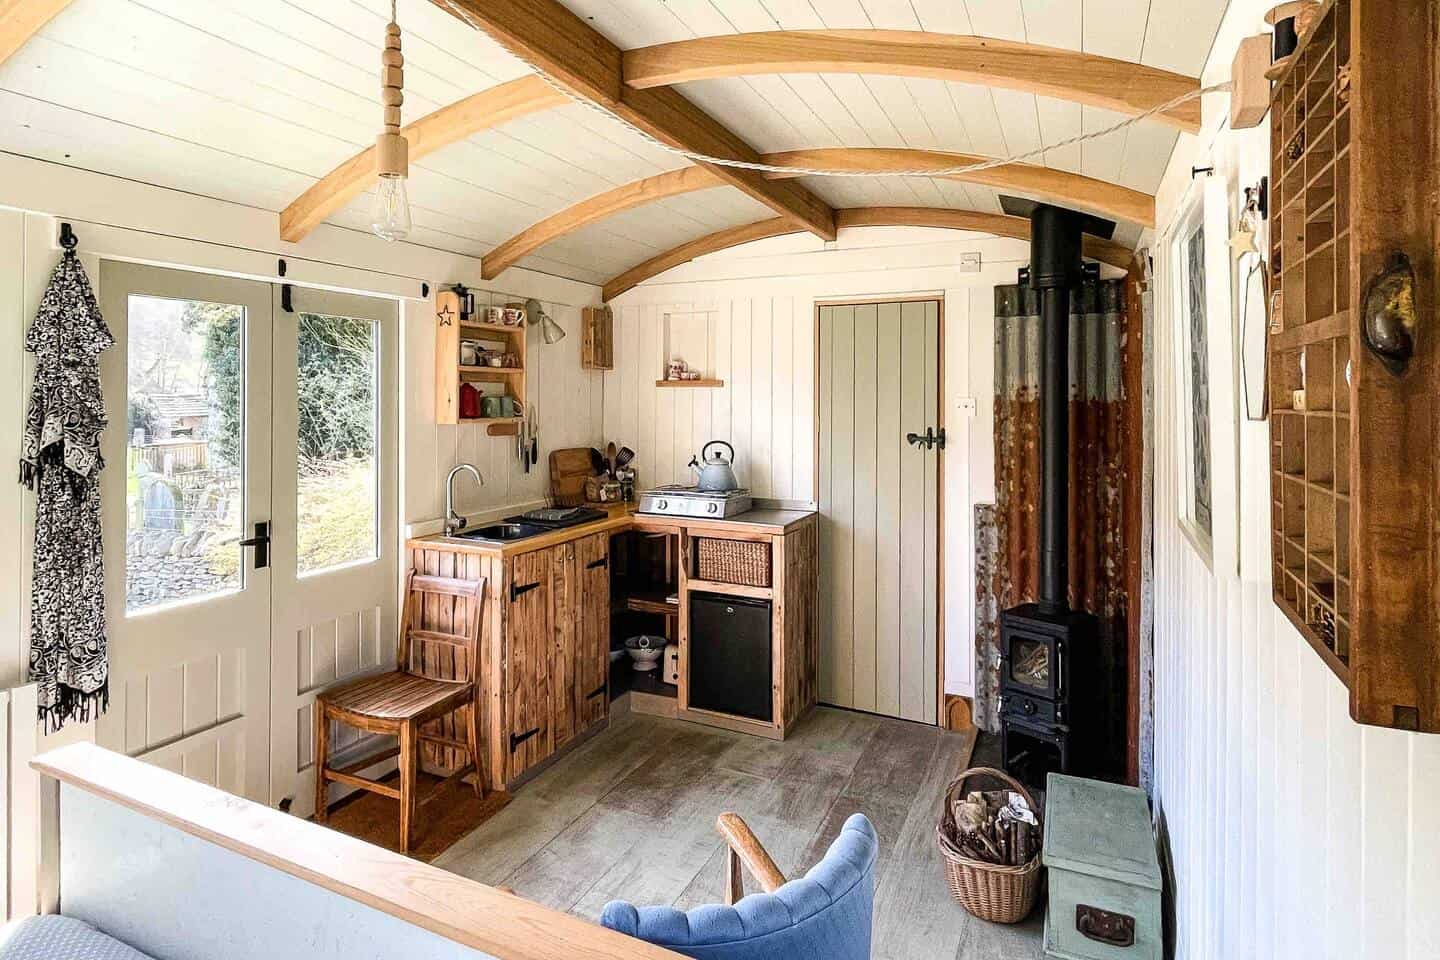 Cozy Retreats Redefined: Interior Design Hacks for Shepherd's Huts with a Small Wood-Burning Stove